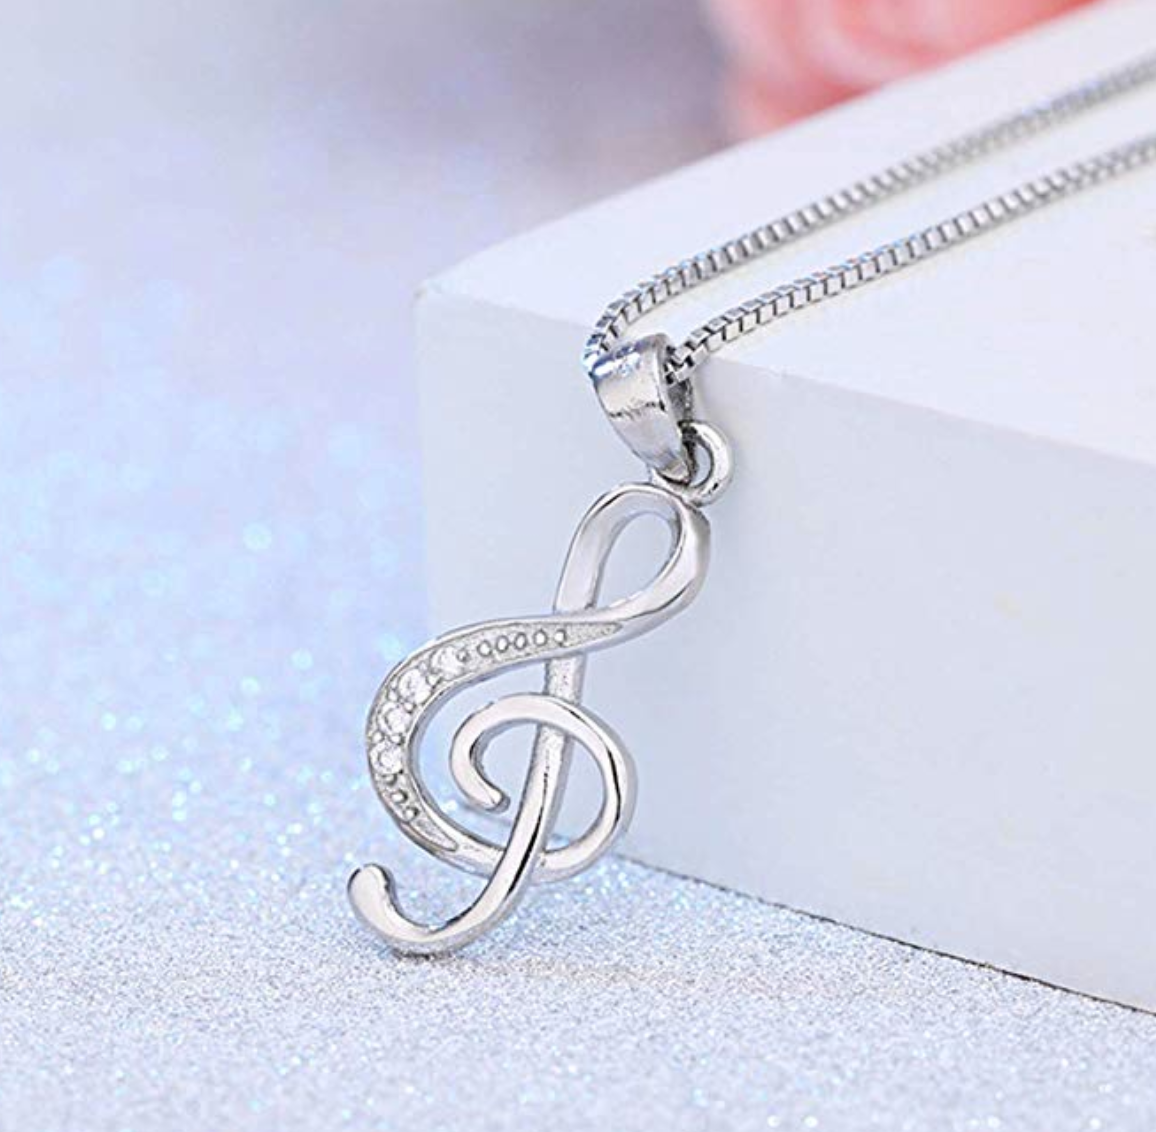 925 Sterling Silver Treble Clef Note Necklace Simulated Diamond Music Note Charm Musician Jewelry Singer Gift 18in.